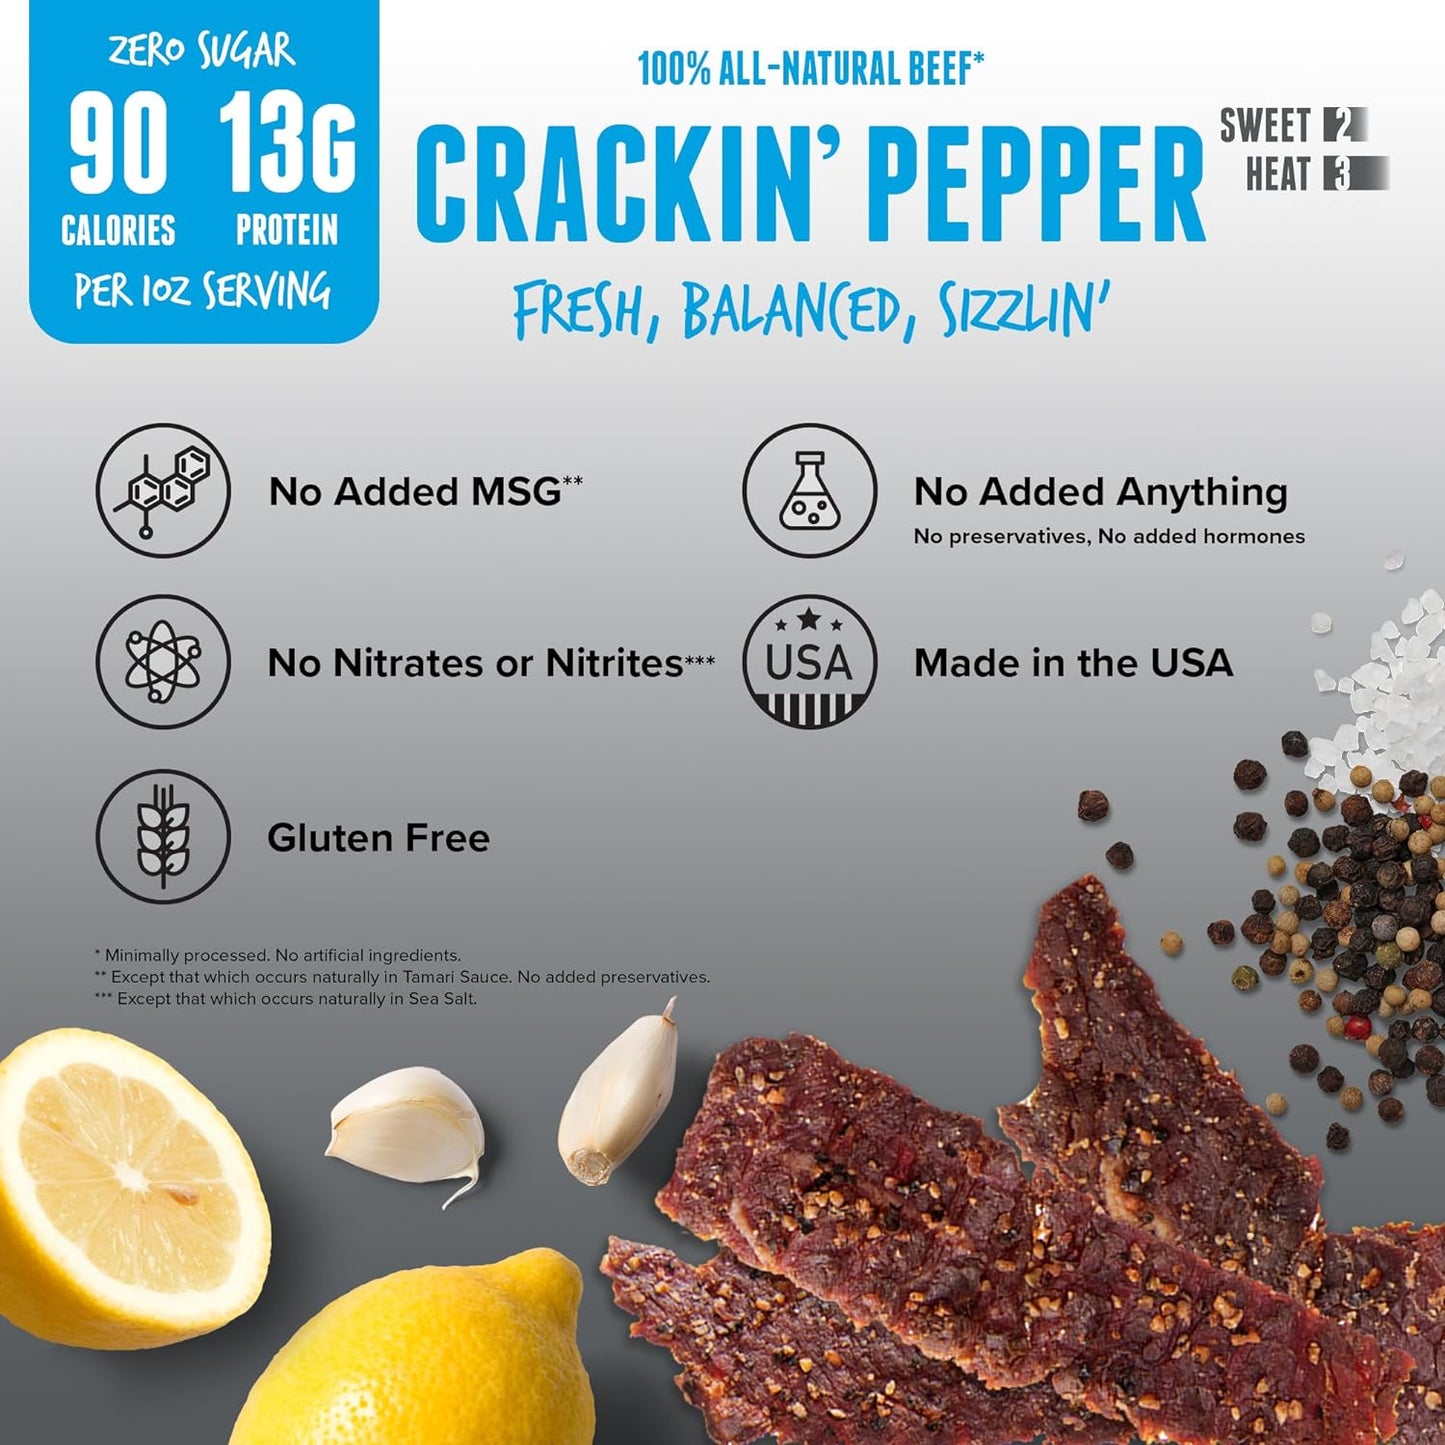 Jerky - 100% All Natural Beef Jerky, Keto Jerky, Gluten Free, Low Calorie Craft Jerky, 13G Protein per Serving, No Nitrates or Added Hormones - Crackin' Pepper, 2 Oz Bag (Pack of 4)